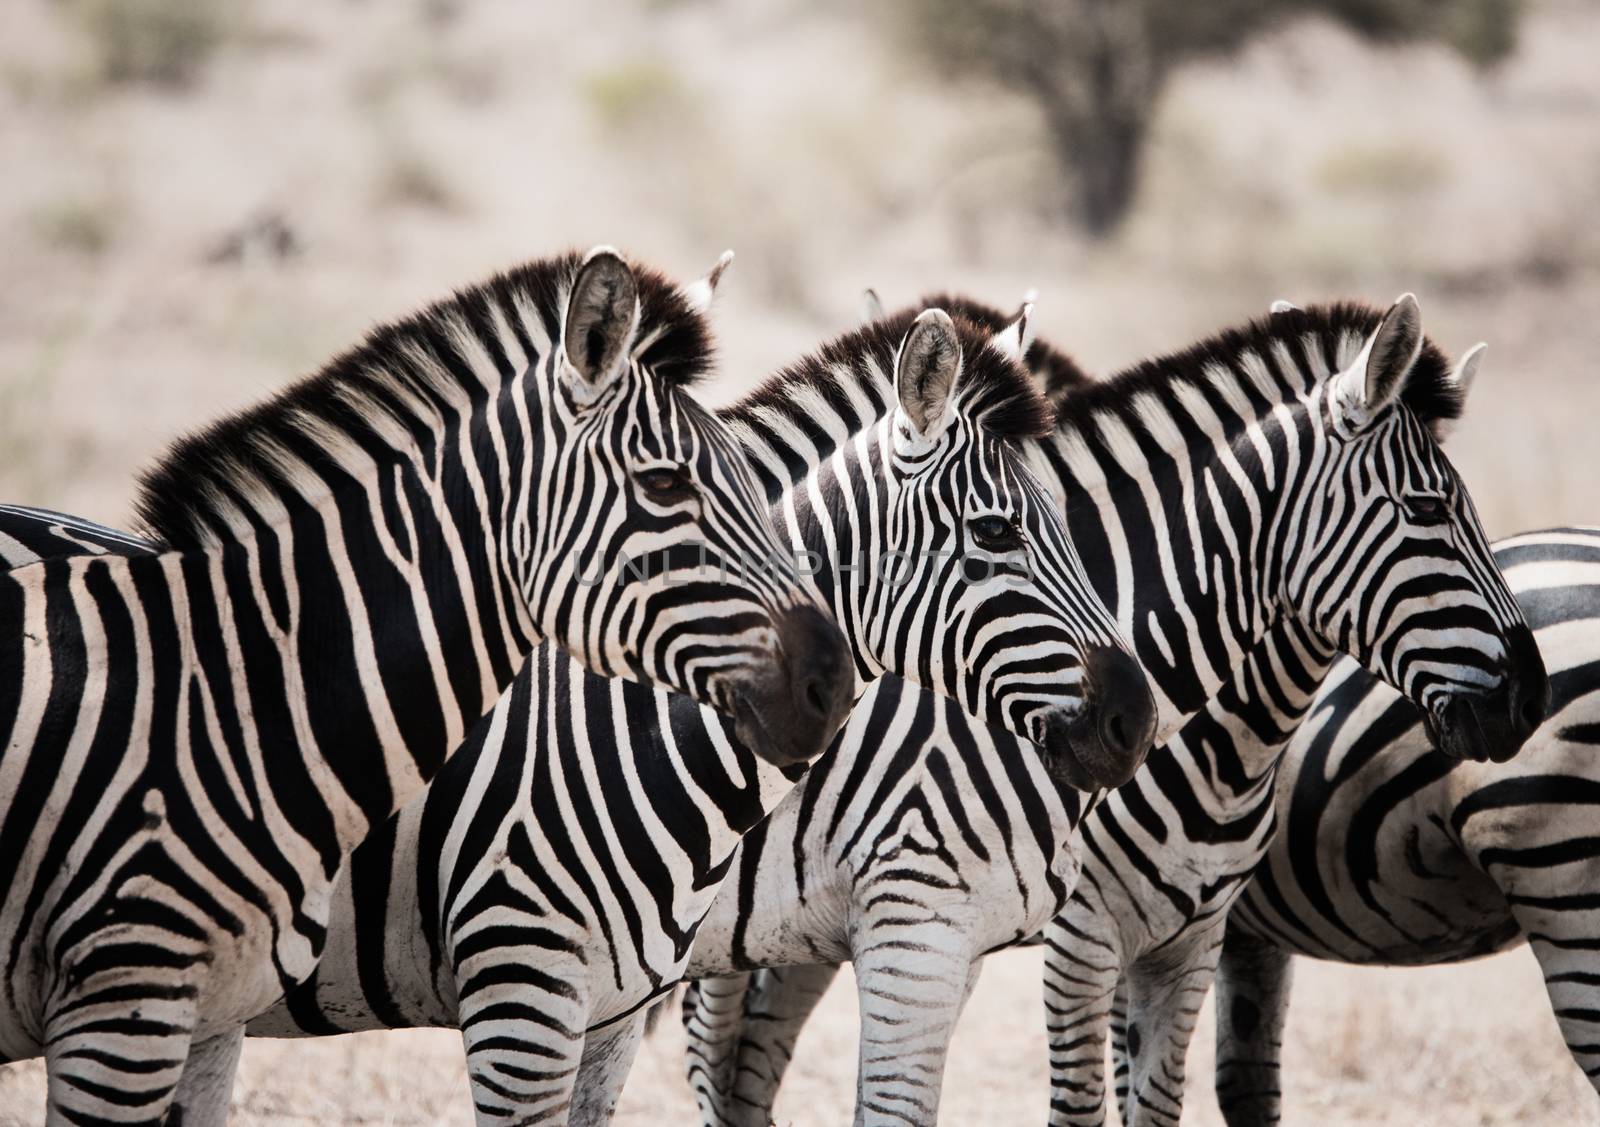 Starring Zebras in the Kruger National Park, South Africa. by Simoneemanphotography